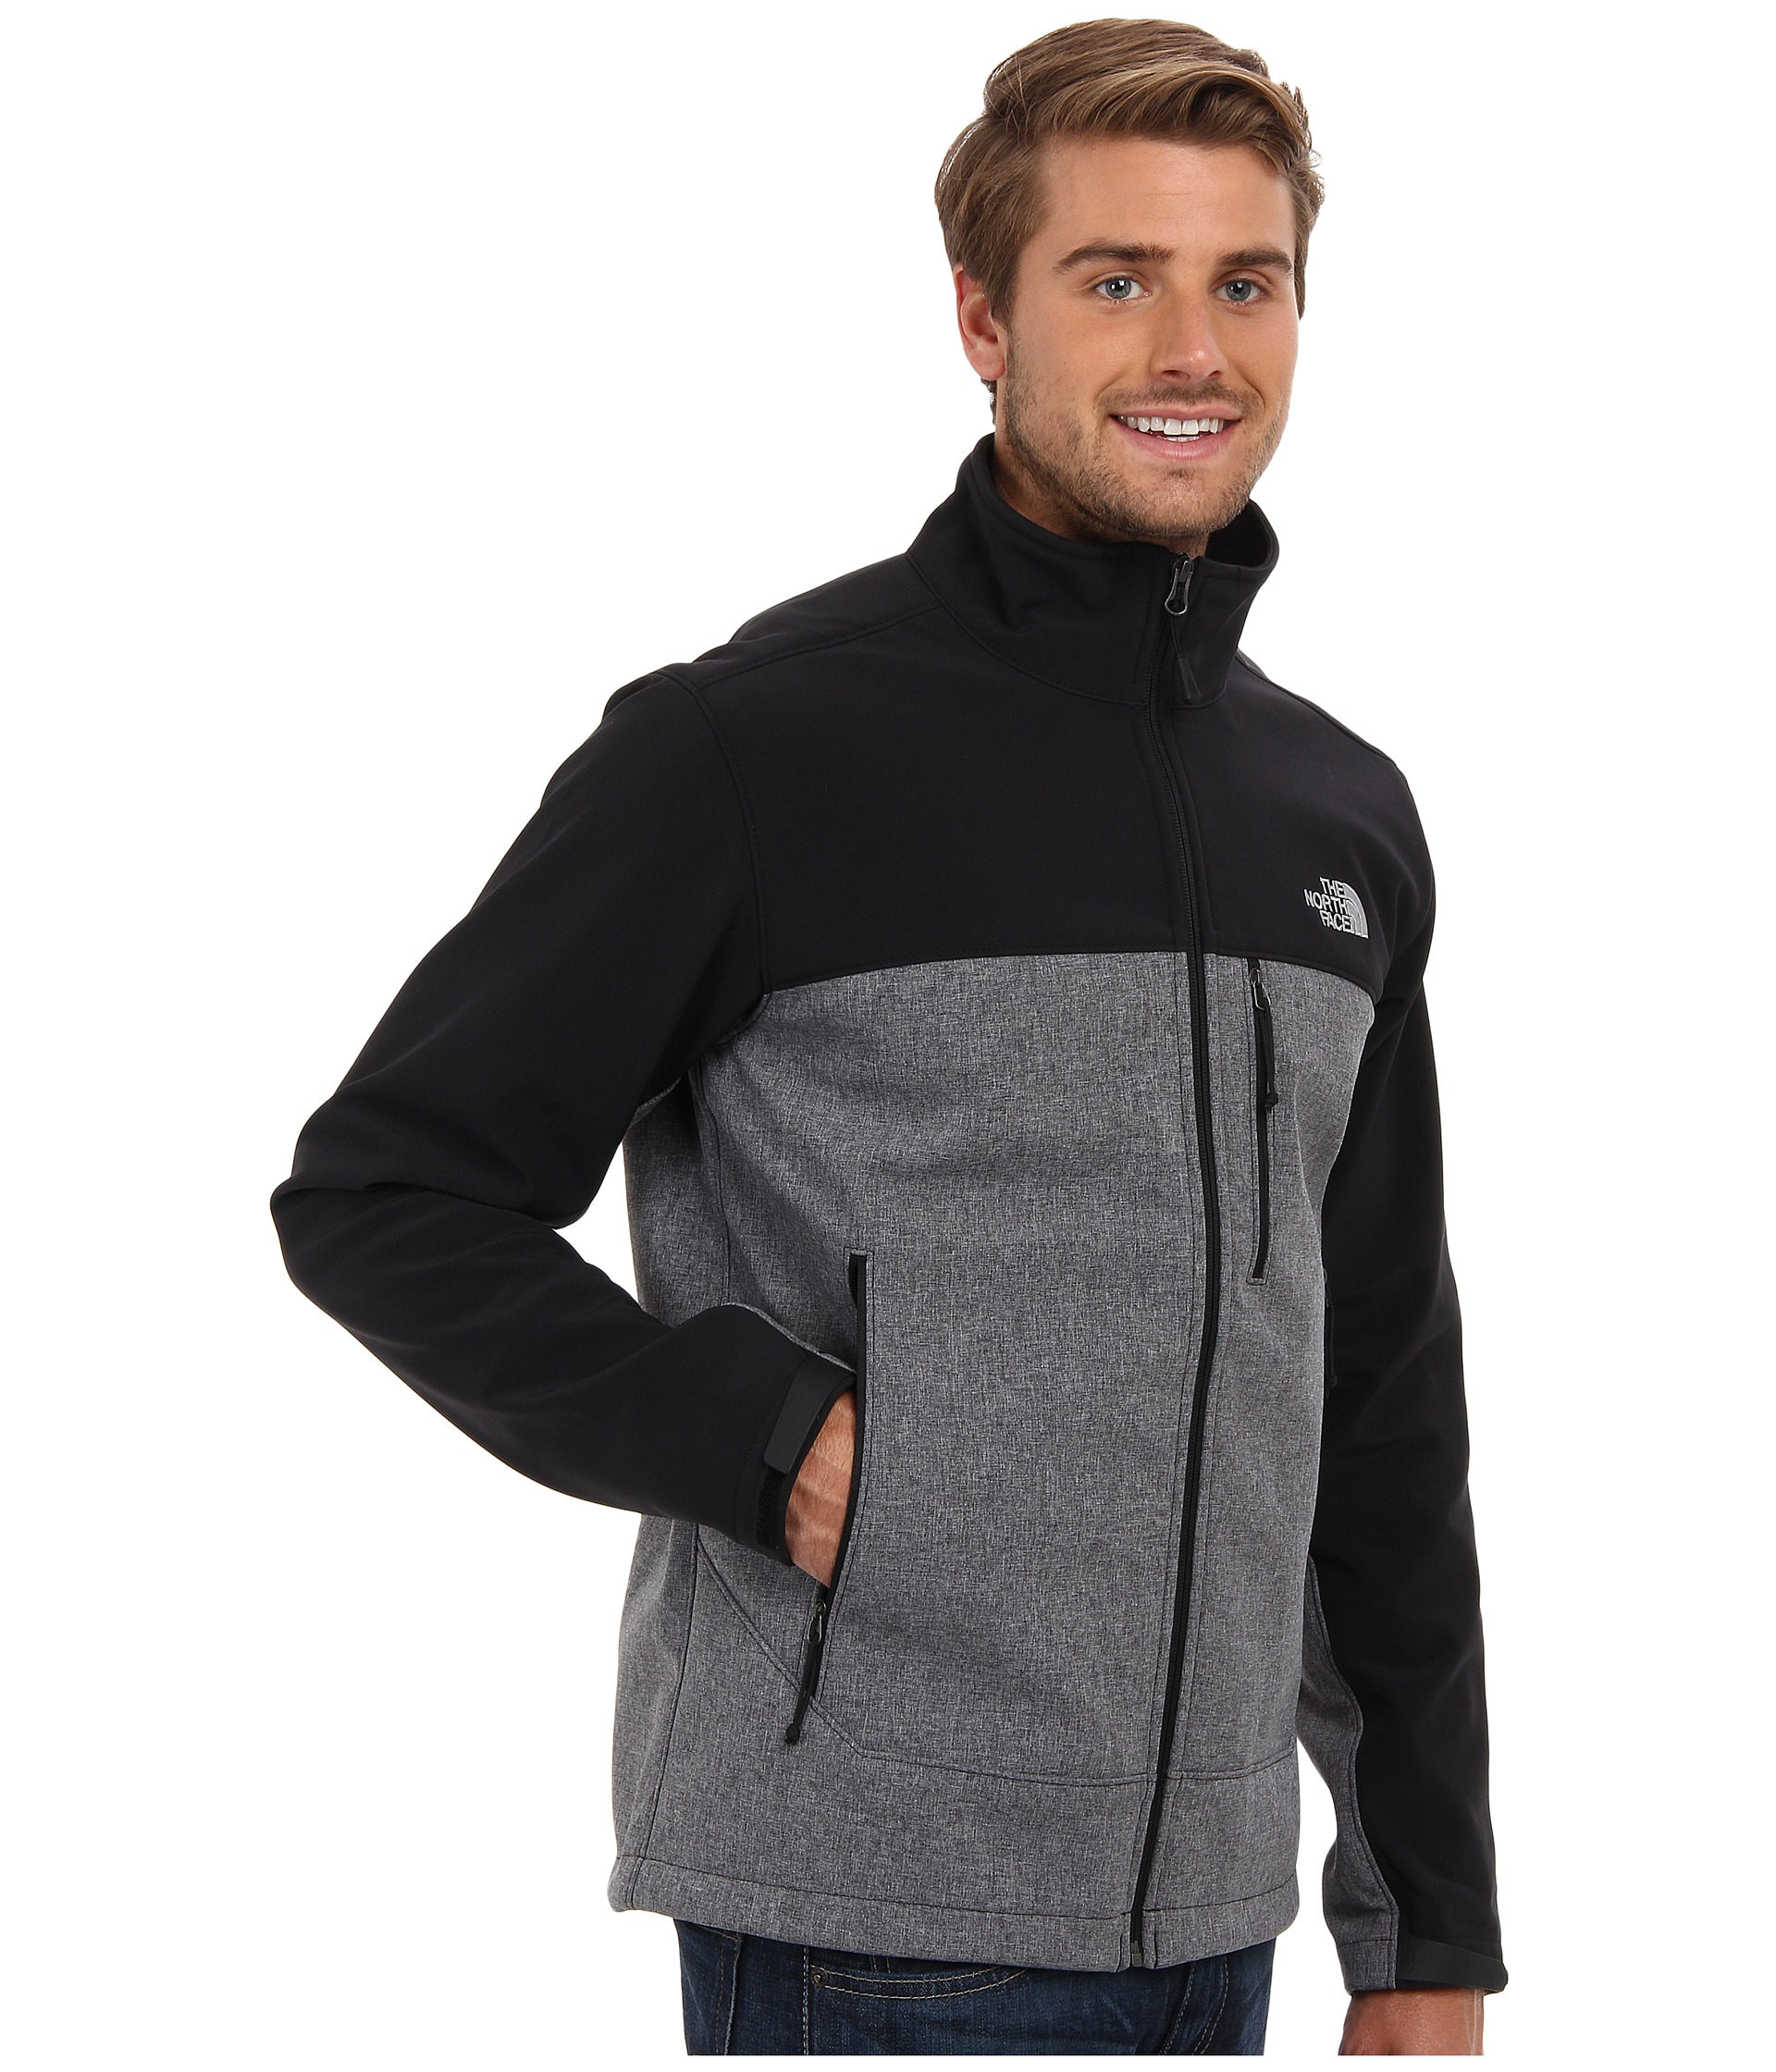 Lyst - The North Face Apex Bionic Jacket in Gray for Men